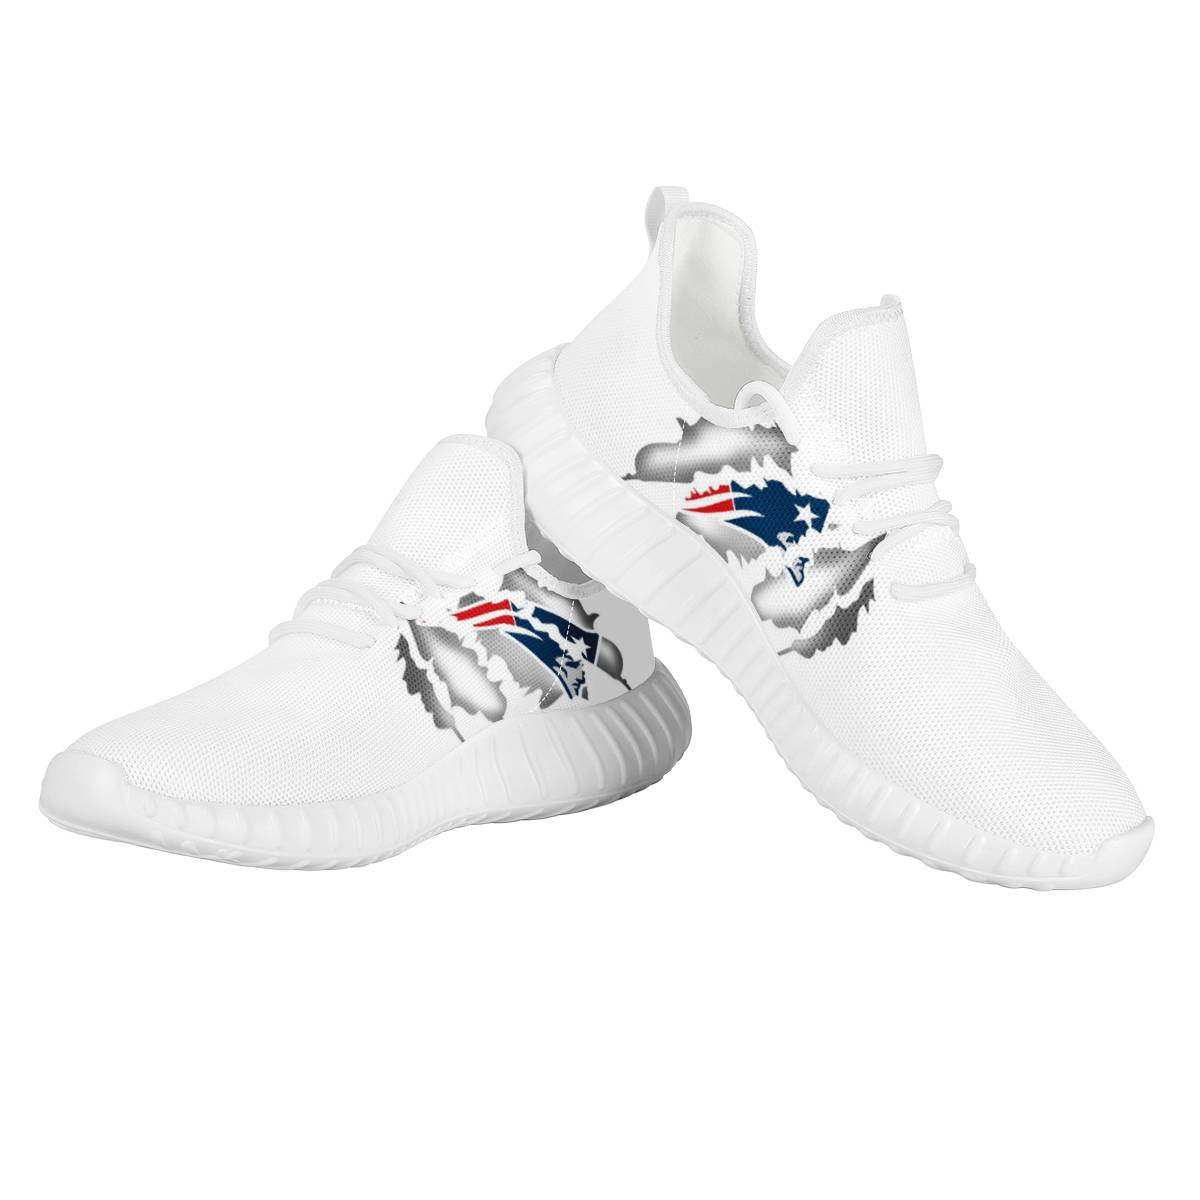 Women's New England Patriots Mesh Knit Sneakers/Shoes 014